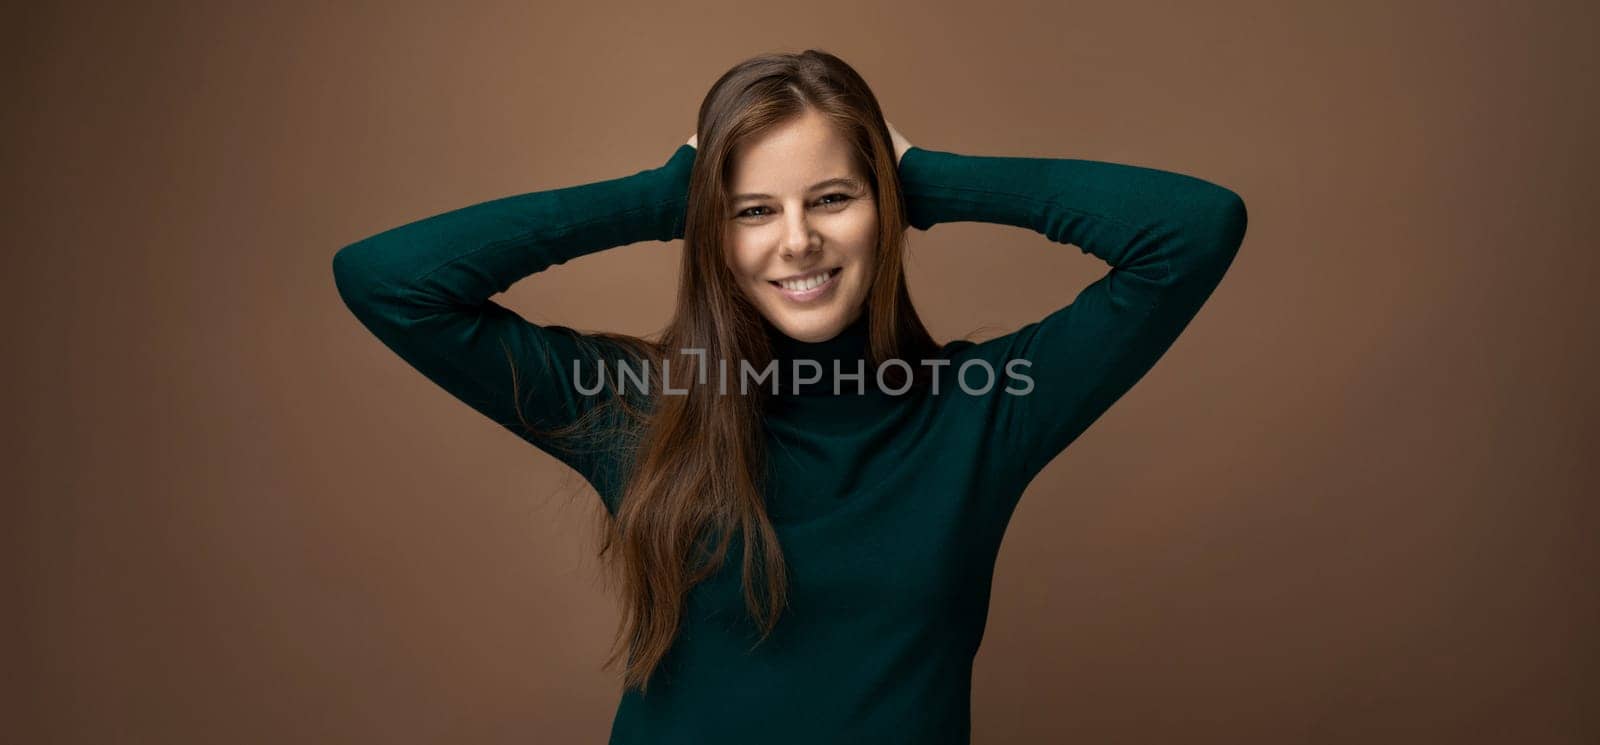 Headshot portrait of a young European woman with brown hair in a casual look.